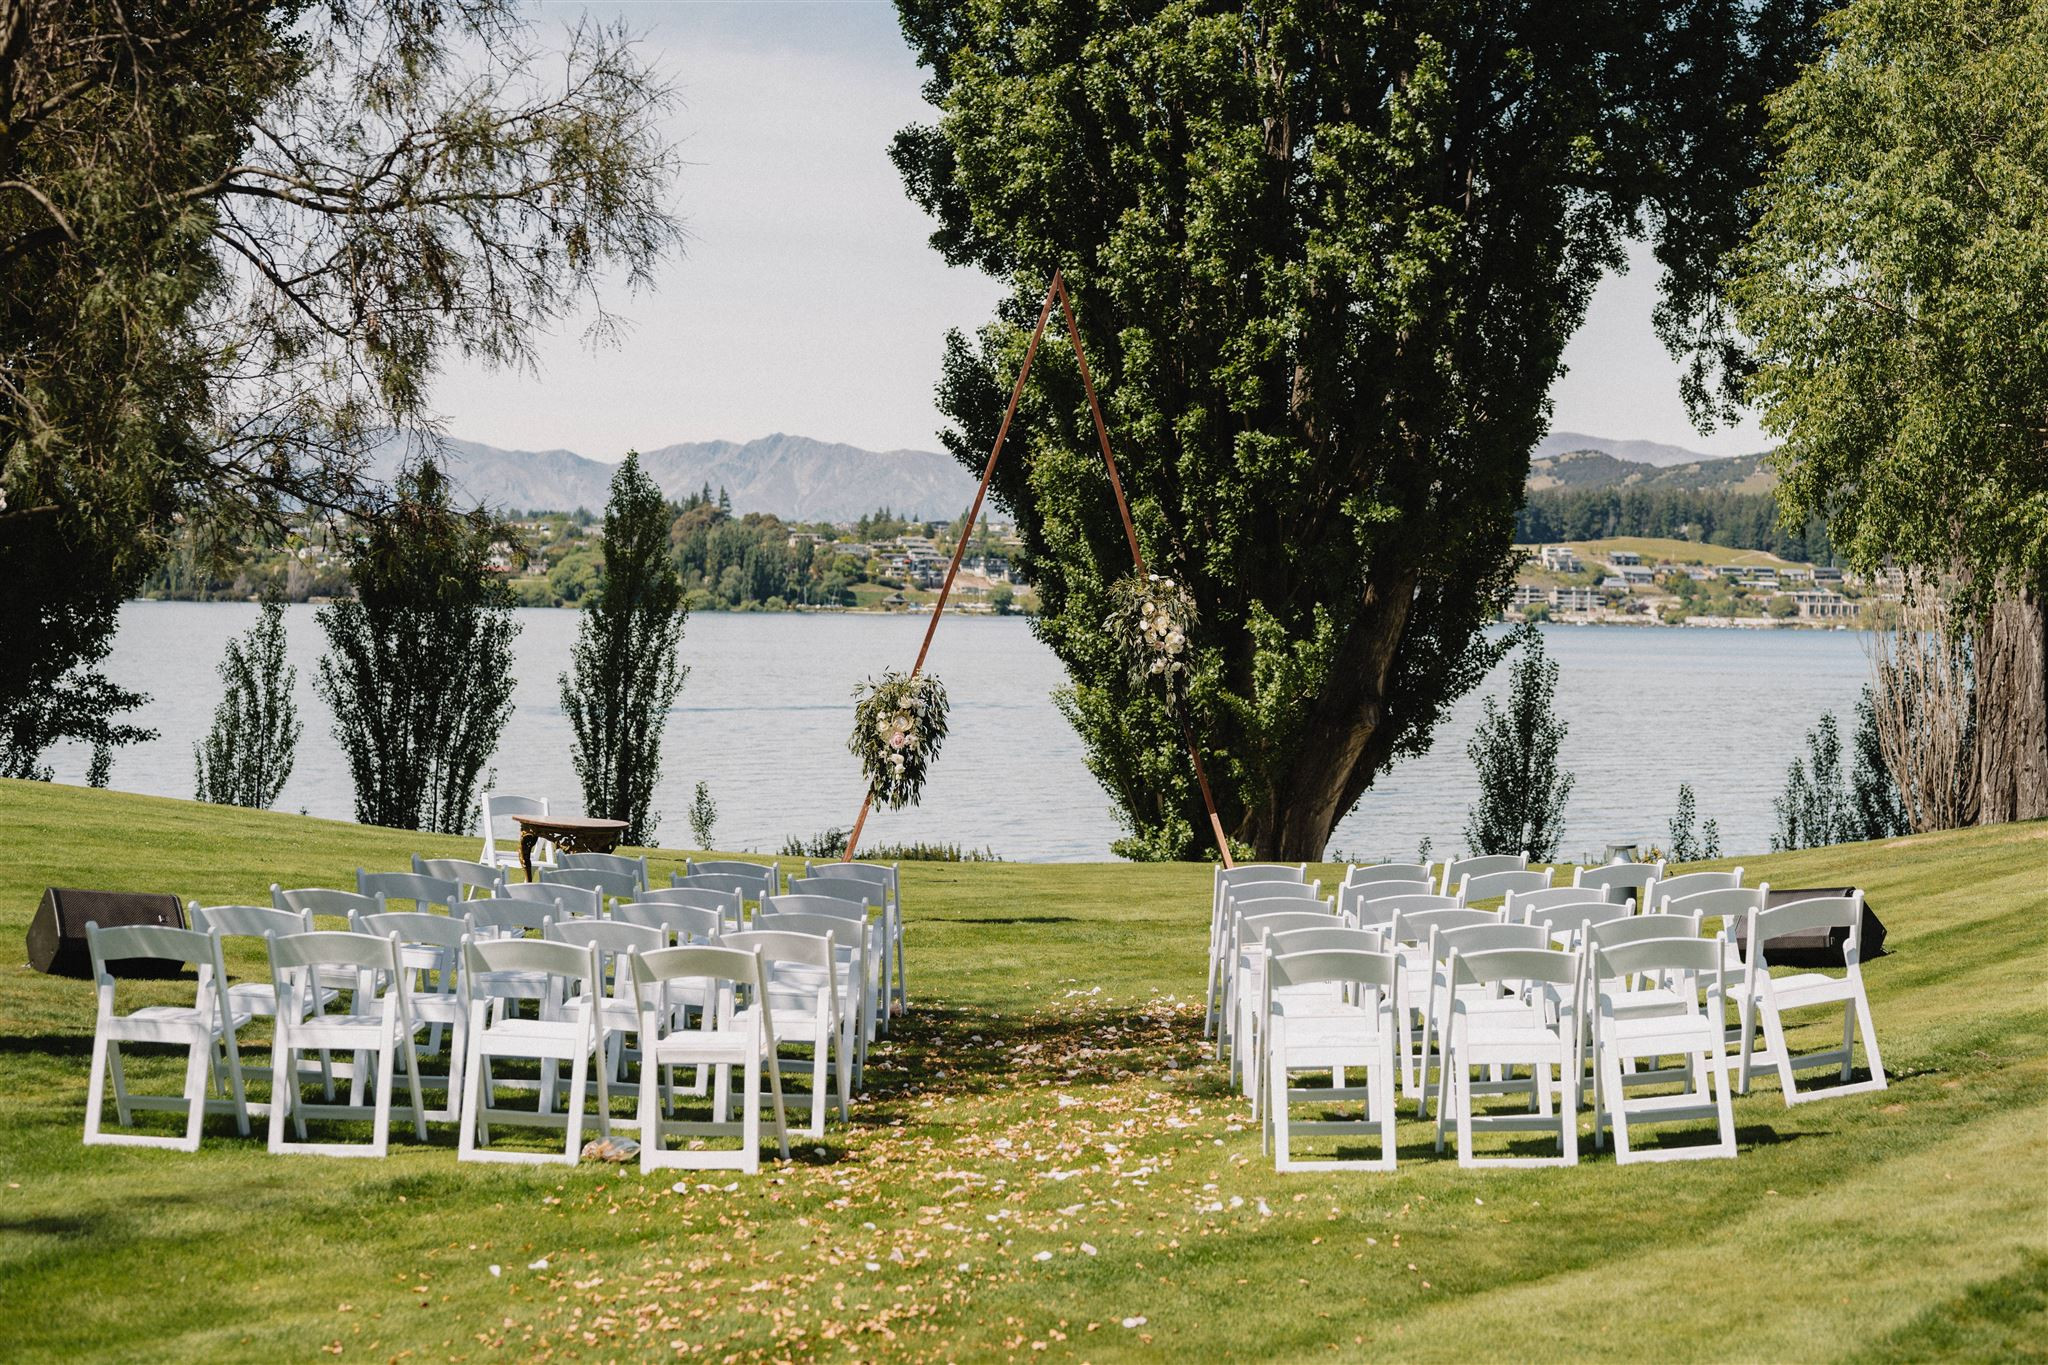 The Pavilion Wedding location that is part of Edgewater's New Zealand Wedding Packages